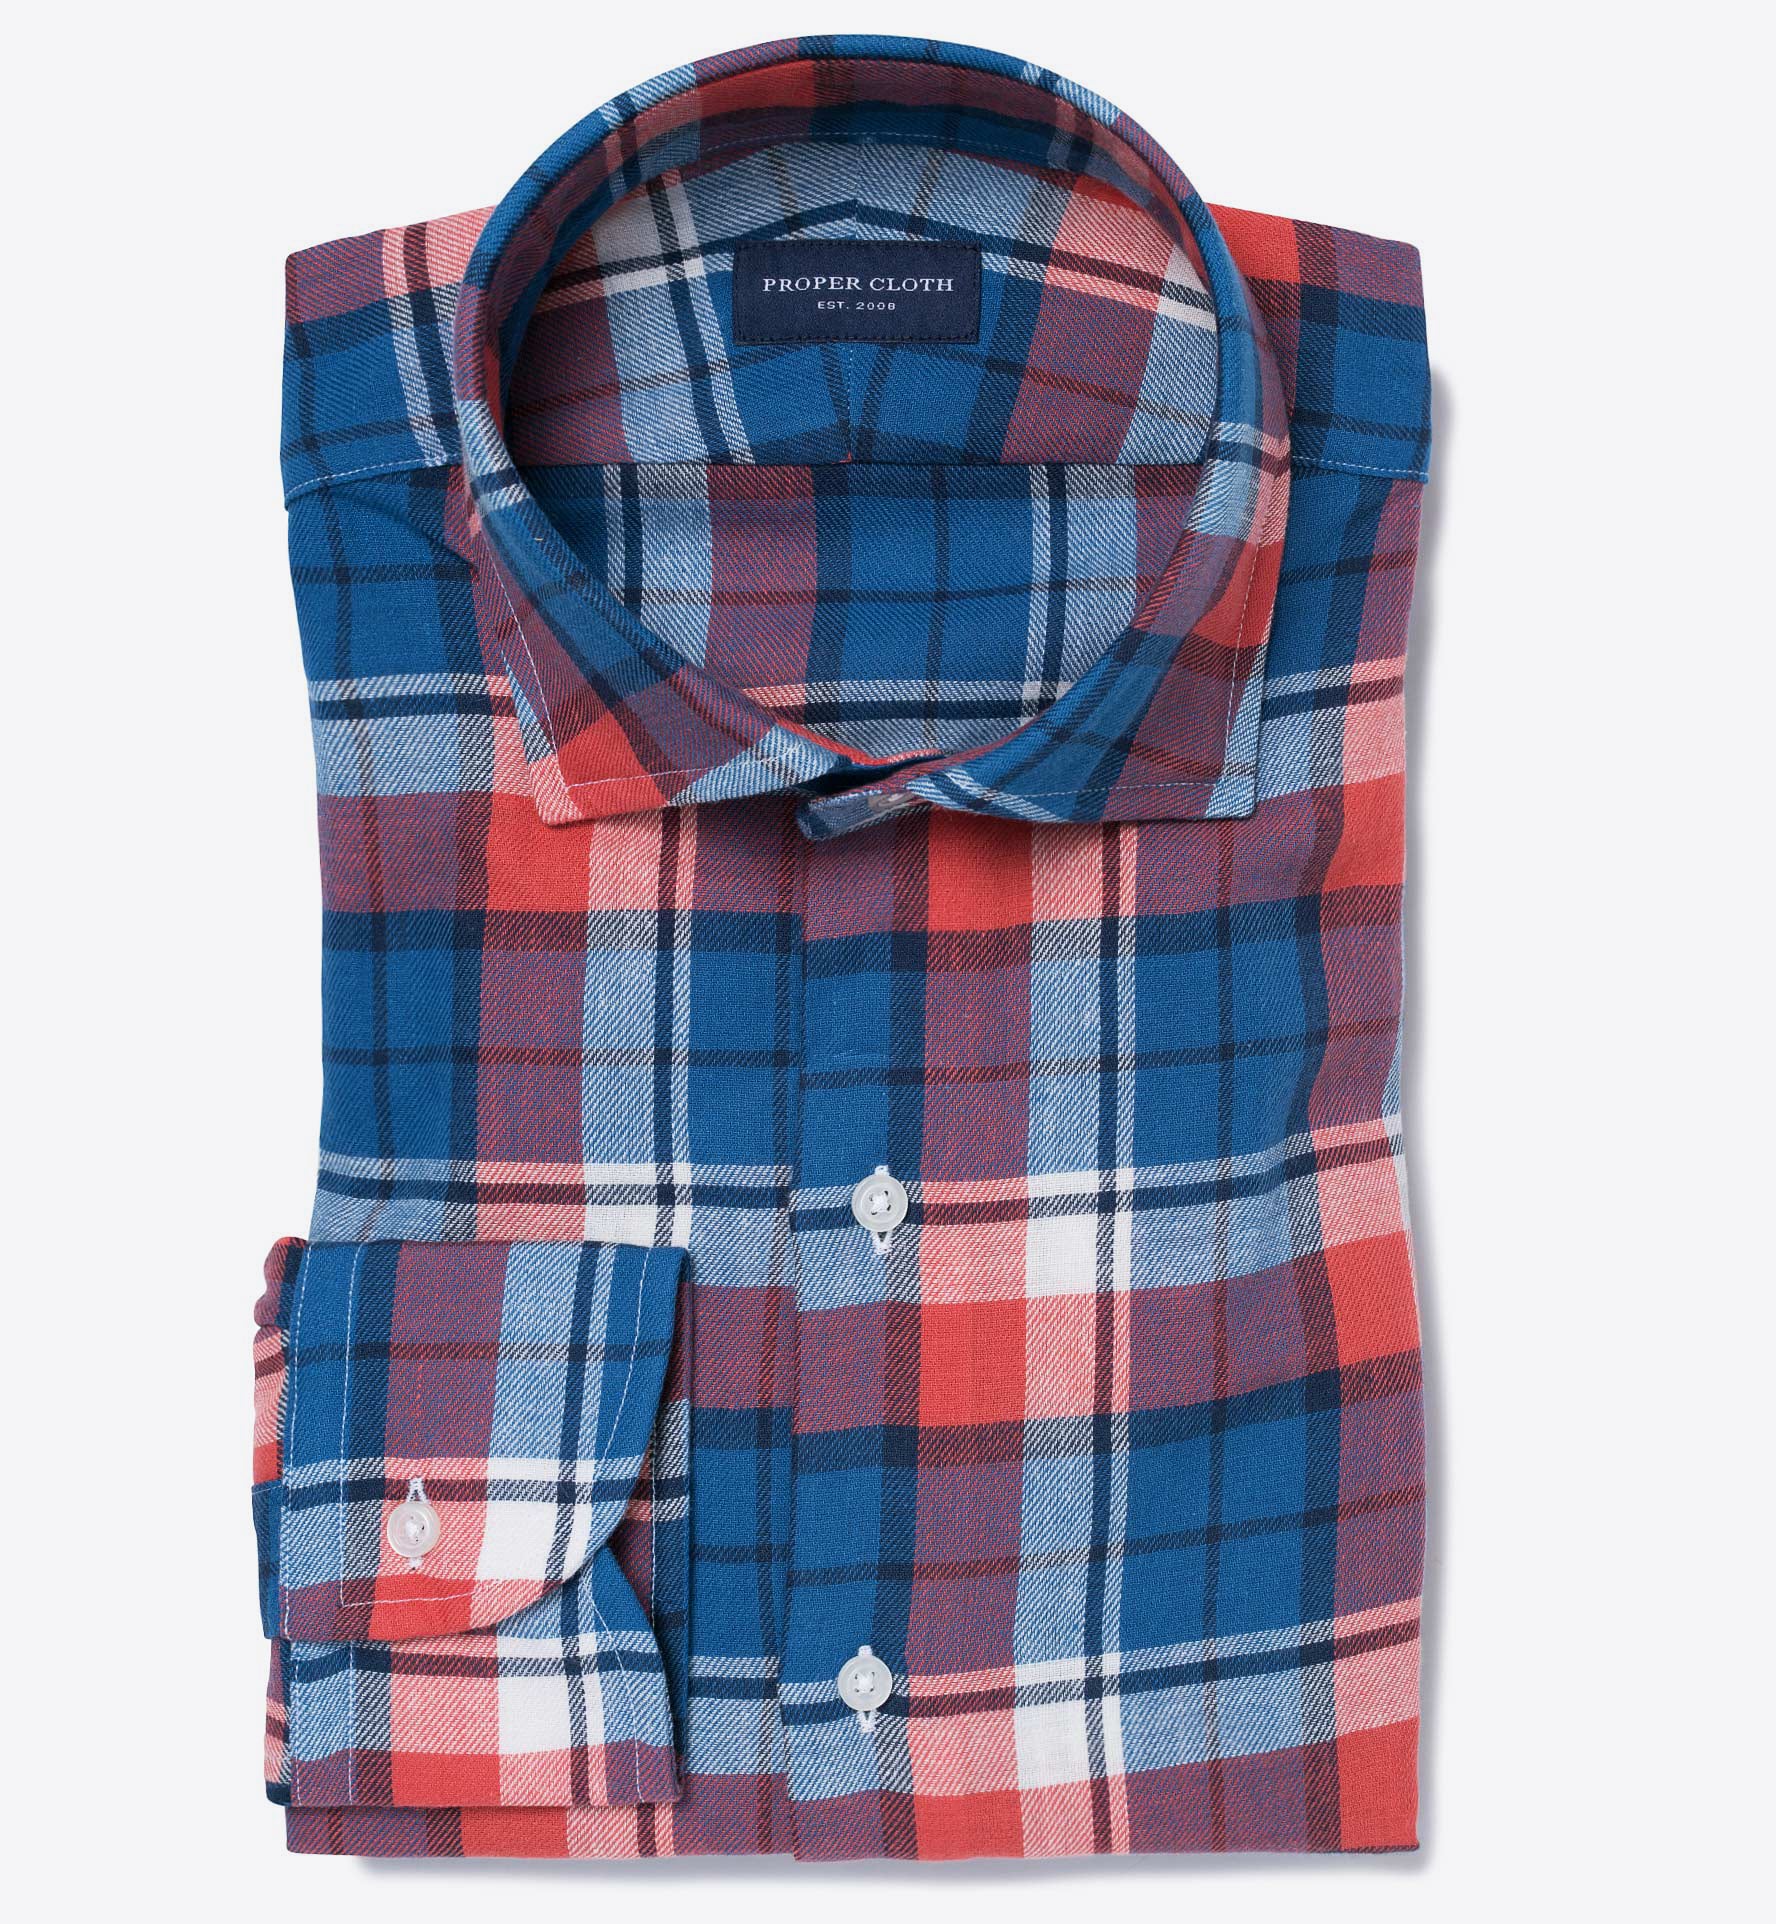 Japanese Red and Blue Plaid Fitted Dress Shirt by Proper Cloth